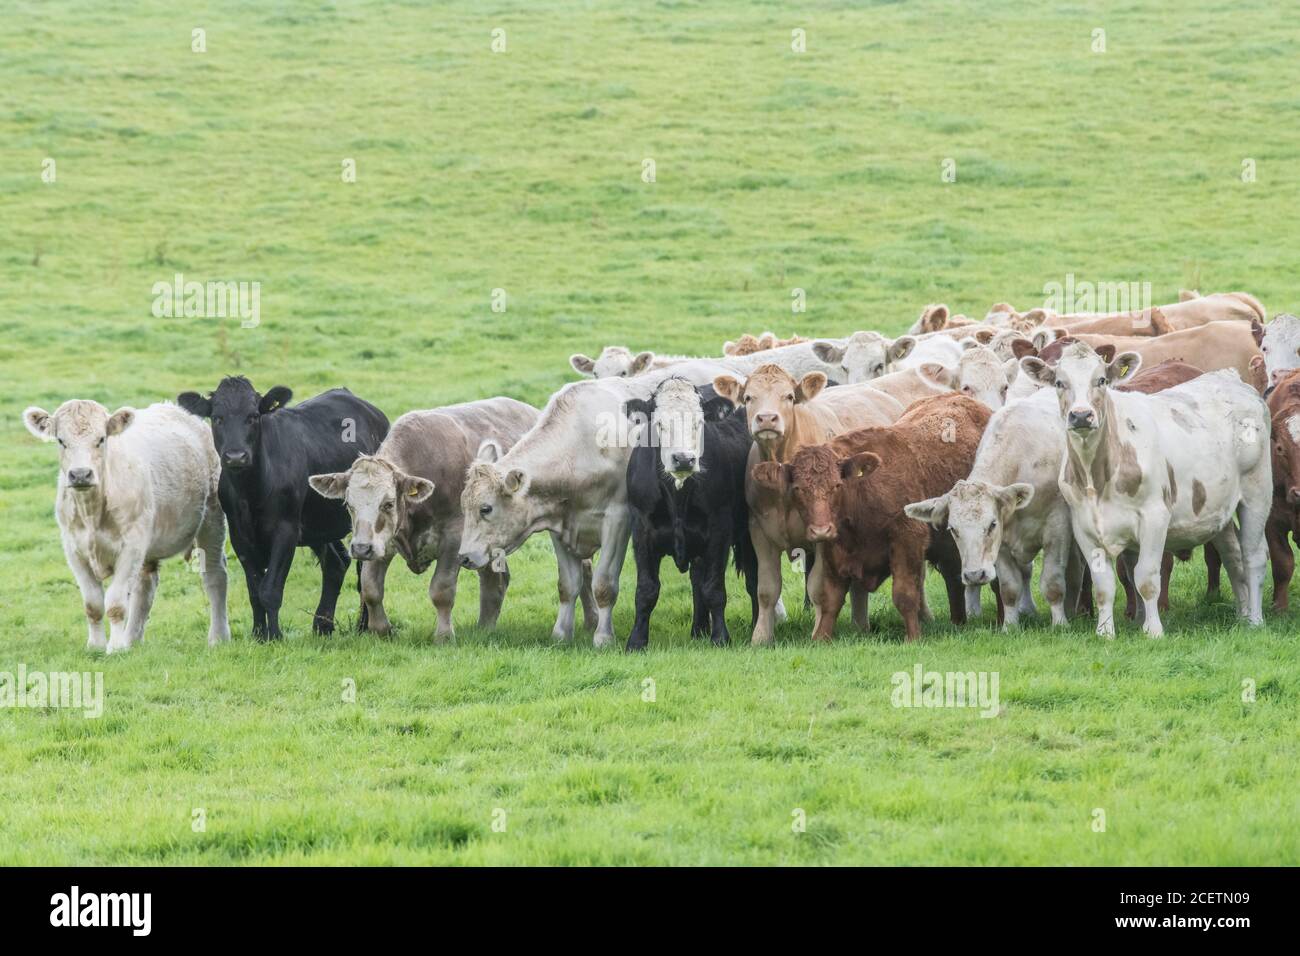 Small herd of young bullocks of mixed colours, standing & looking inquisitively at camera. For UK livestock industry, British beef, UK farming. Stock Photo